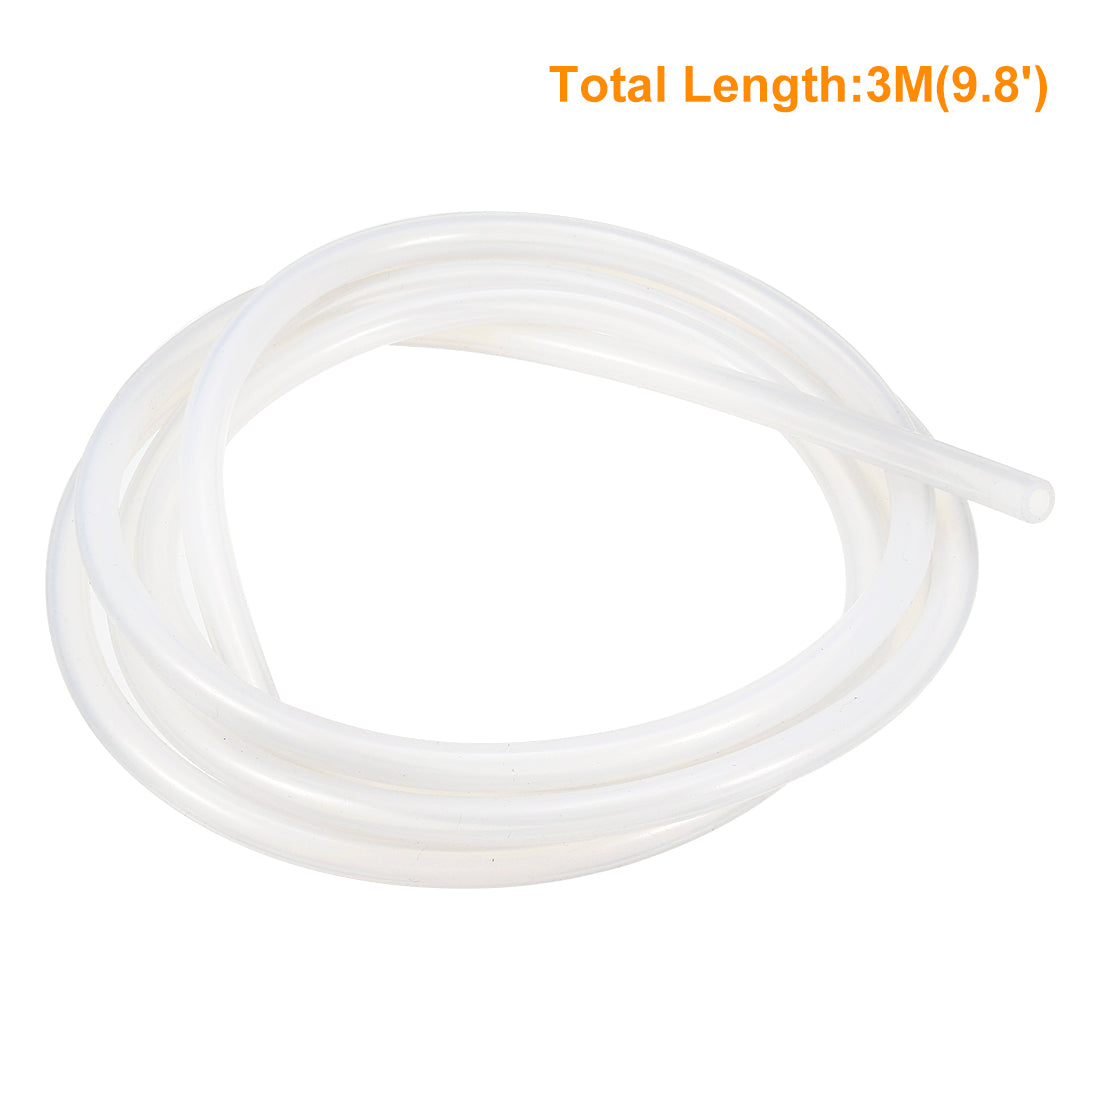 uxcell Uxcell Silicone Tube 5mm ID X 7mm OD 9.8' Flexible Silicone Rubber Tubing Water Air Hose Pipe Translucent for Pump Transfer